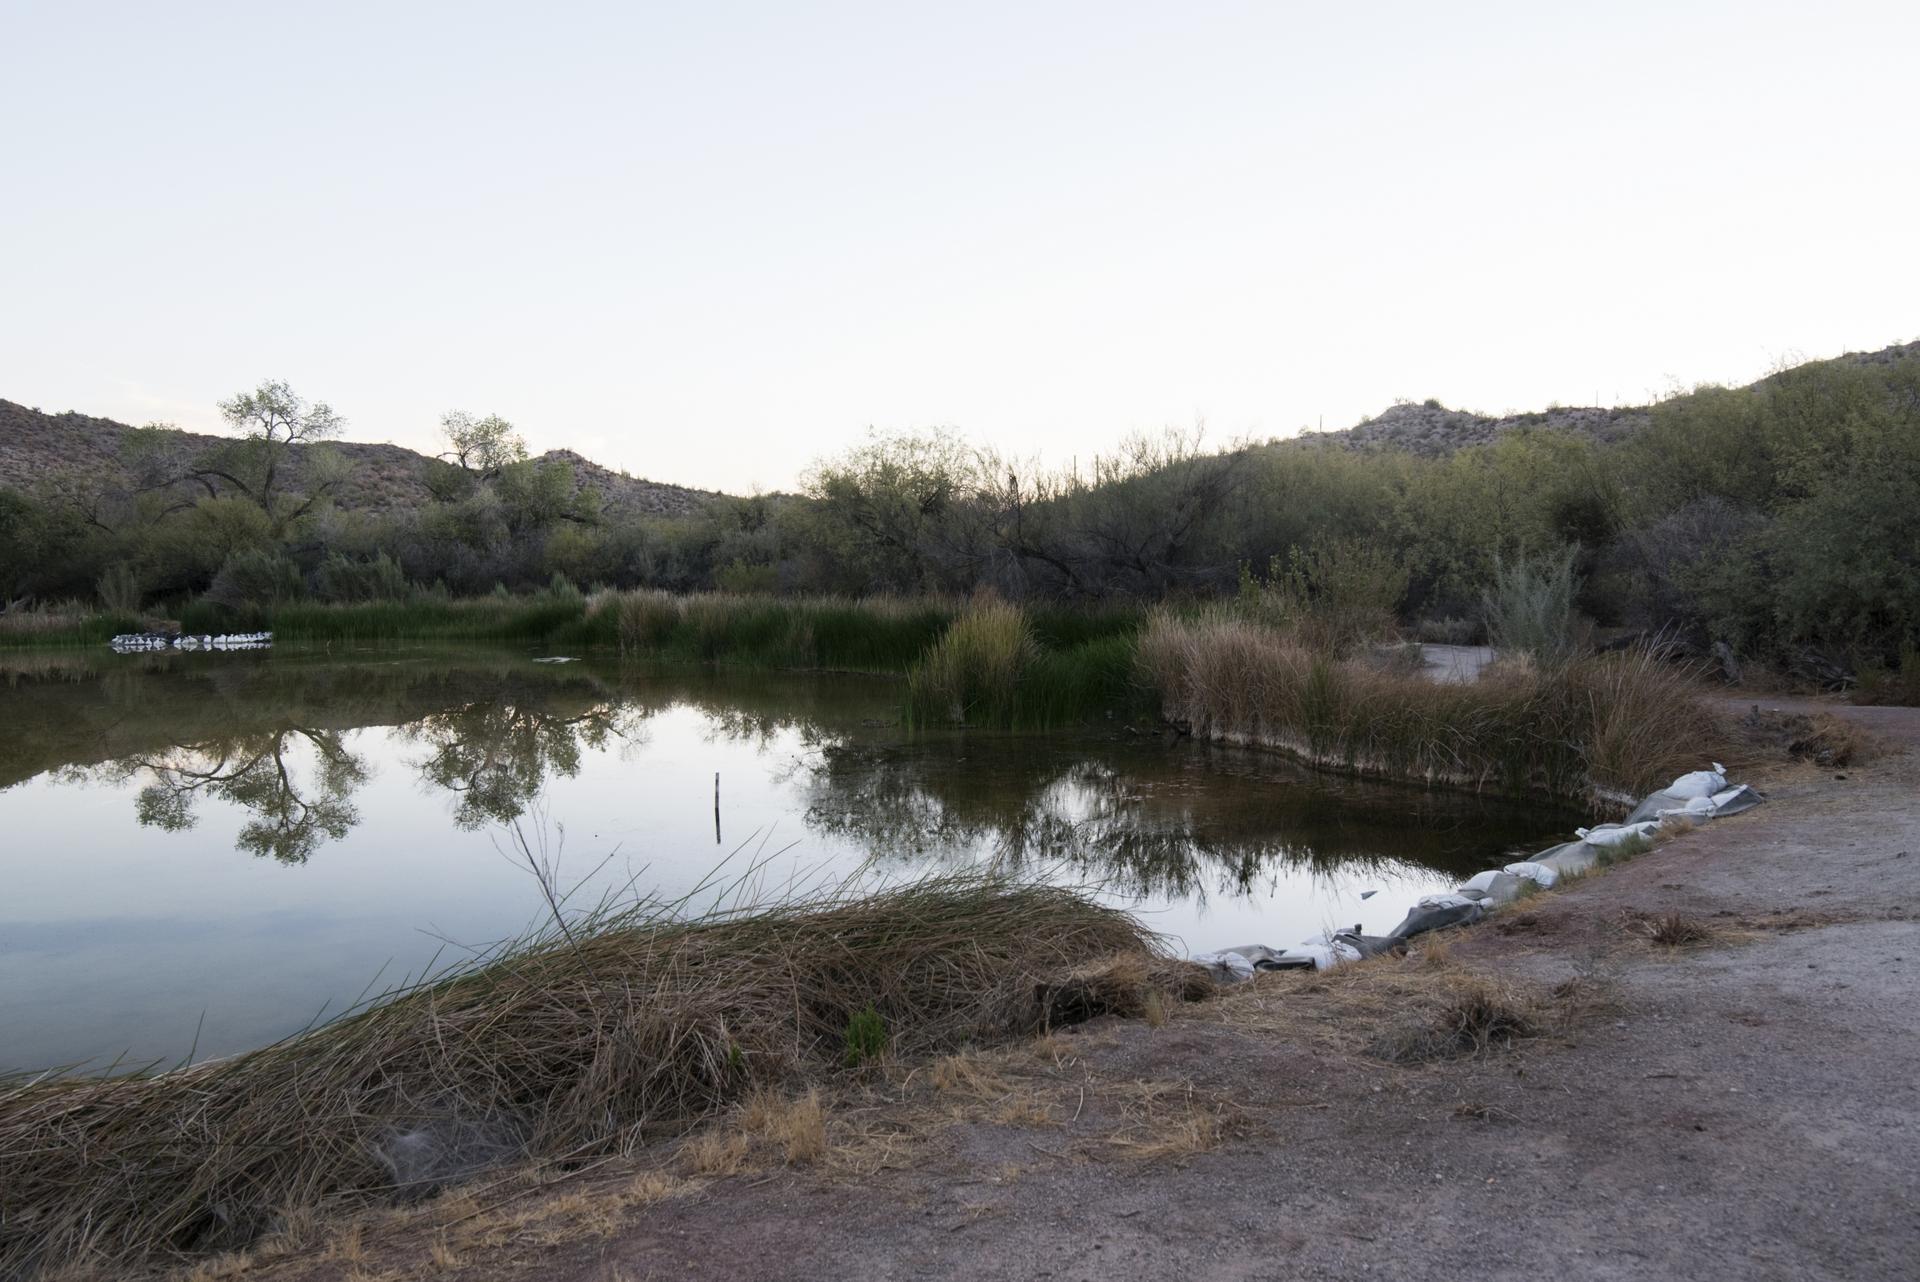 This past summer, towering steel barriers started going up across O’odham sites like Quitobaquito Springs, a desert water source and man-made pond that has been part of Hia C-ed O’odham communities long before Spanish colonialism.